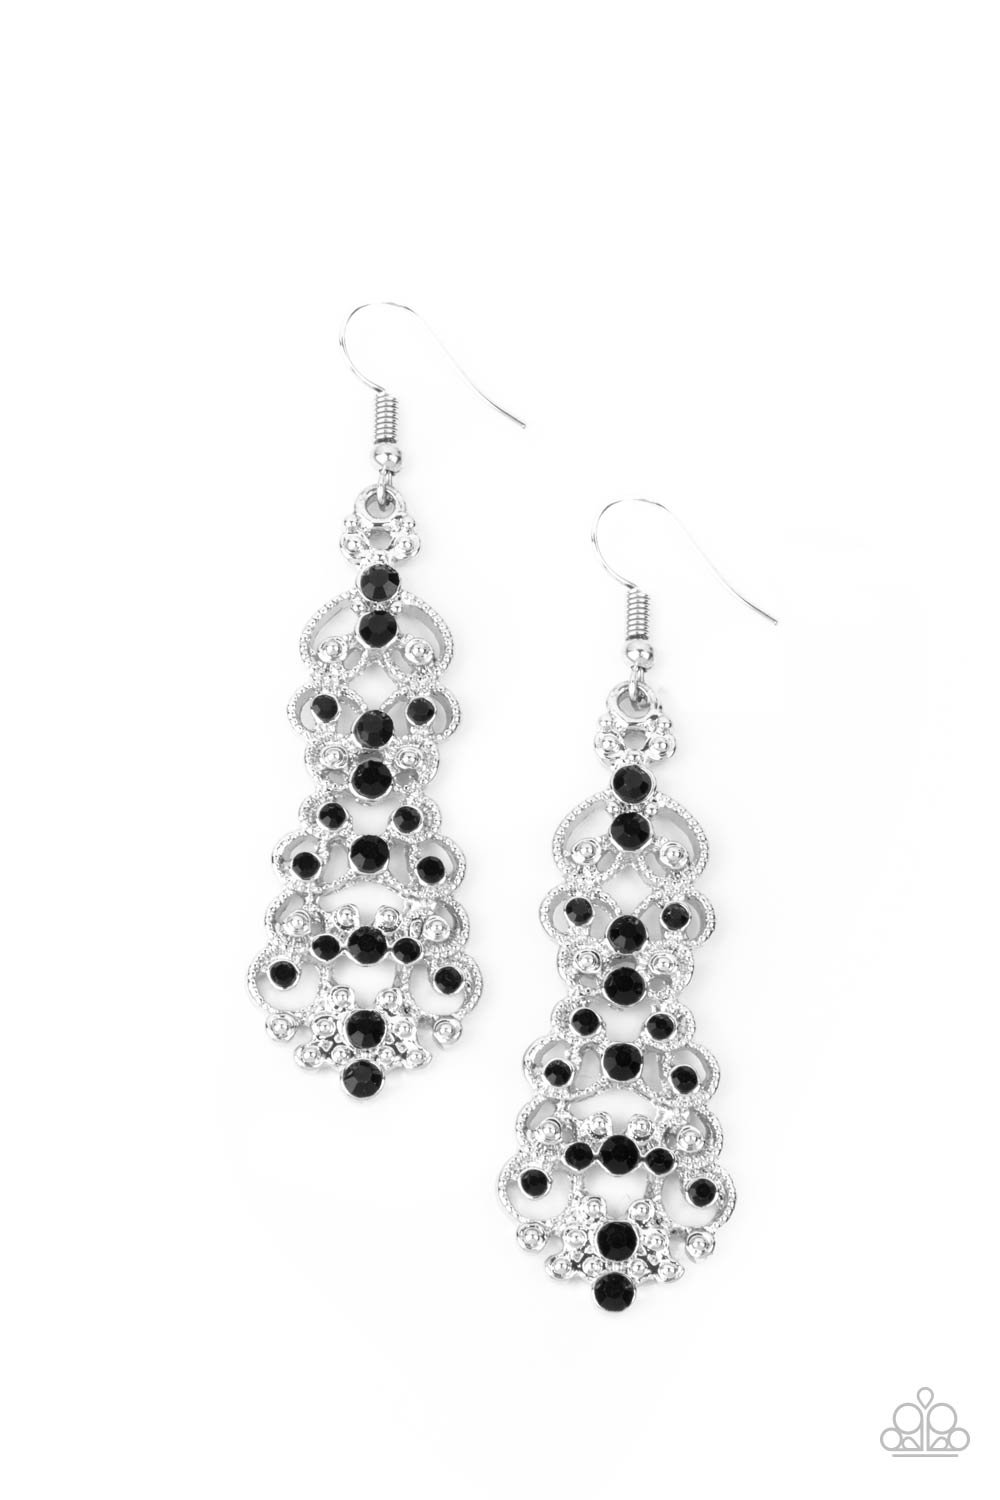 Sporadically dotted in glassy black rhinestones, studded silver filigree delicately whirls into a stacked lure for an elegant display. Earring attaches to a standard fishhook fitting.